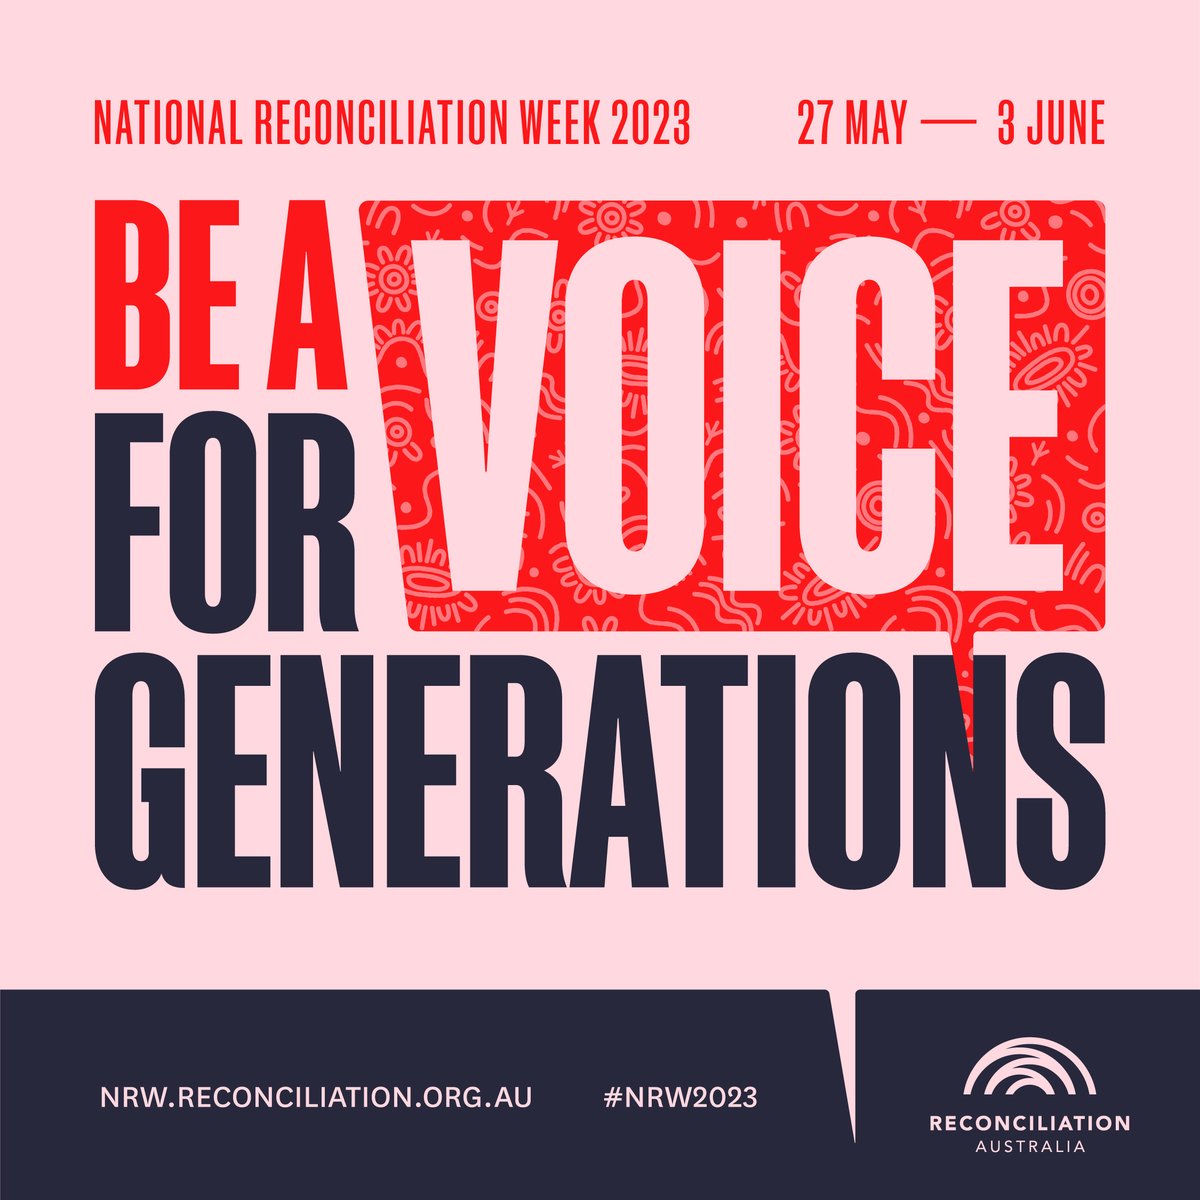 Celebrate National Reconciliation Week and explore how you can contribute towards reconciliation.
#NRW2023 
#alwayswasalwayswillbe